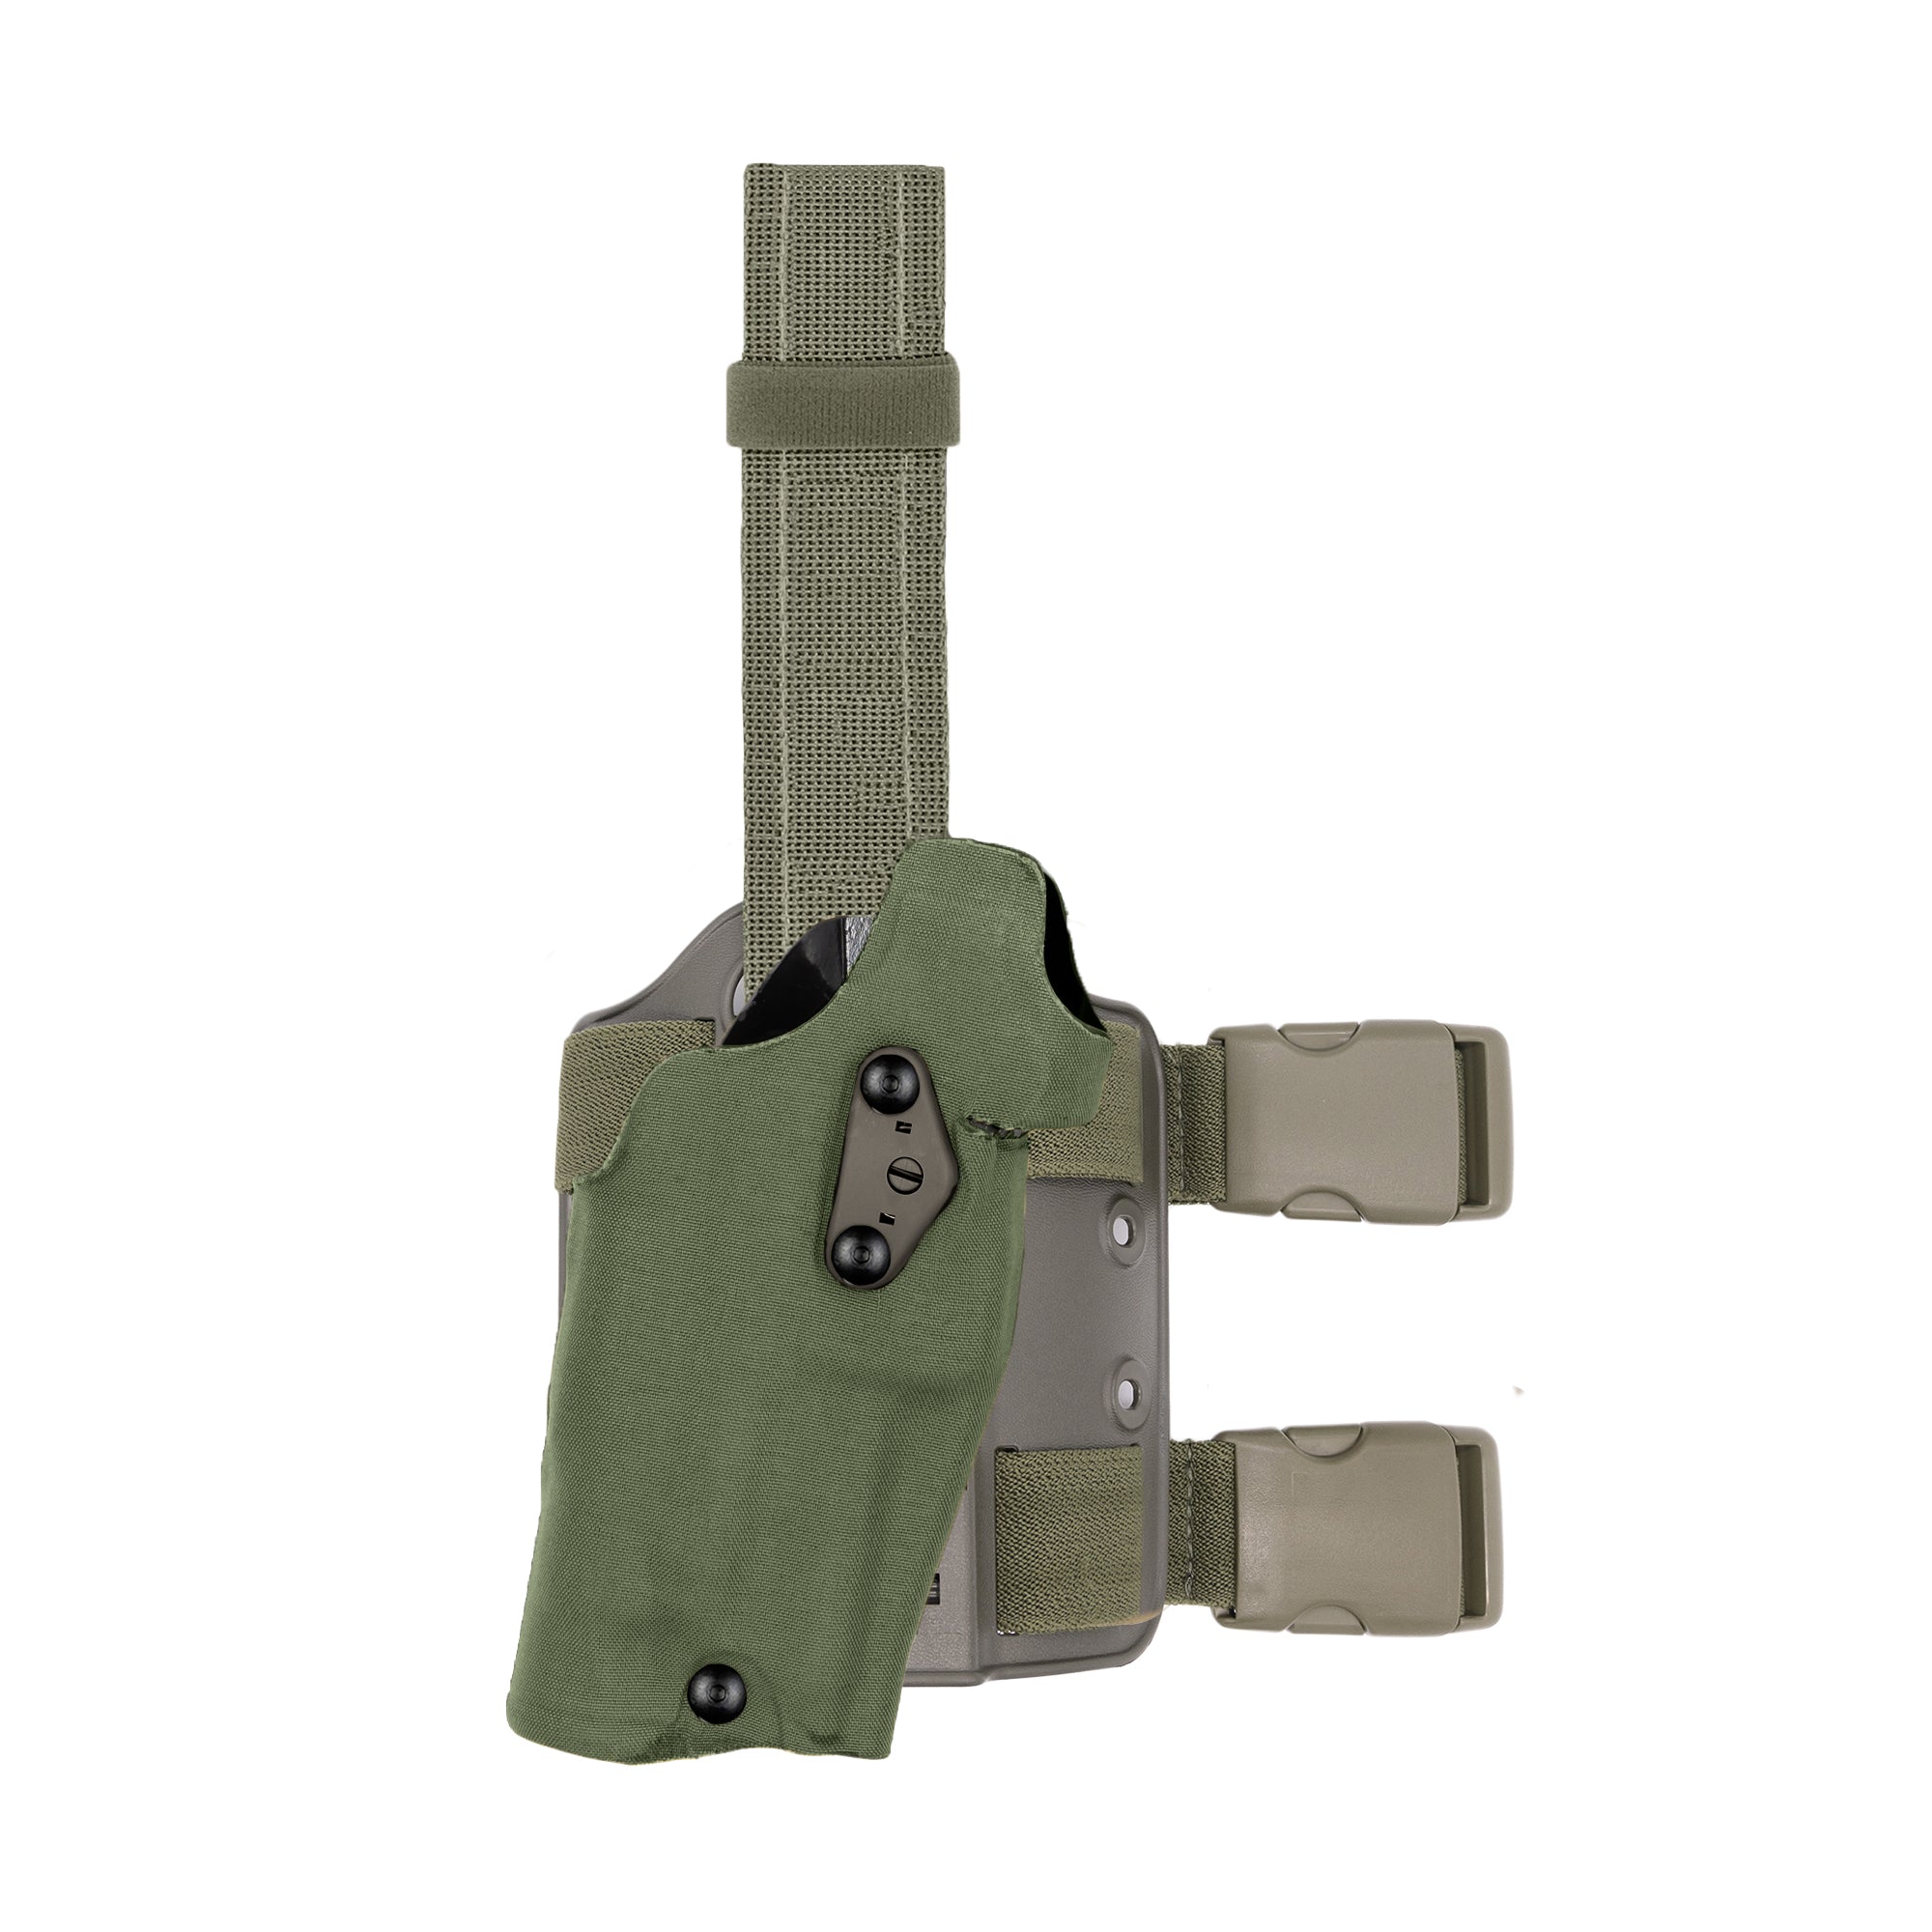 6354DO - ALS® Optic Tactical Holster for Red Dot Optic | Safariland